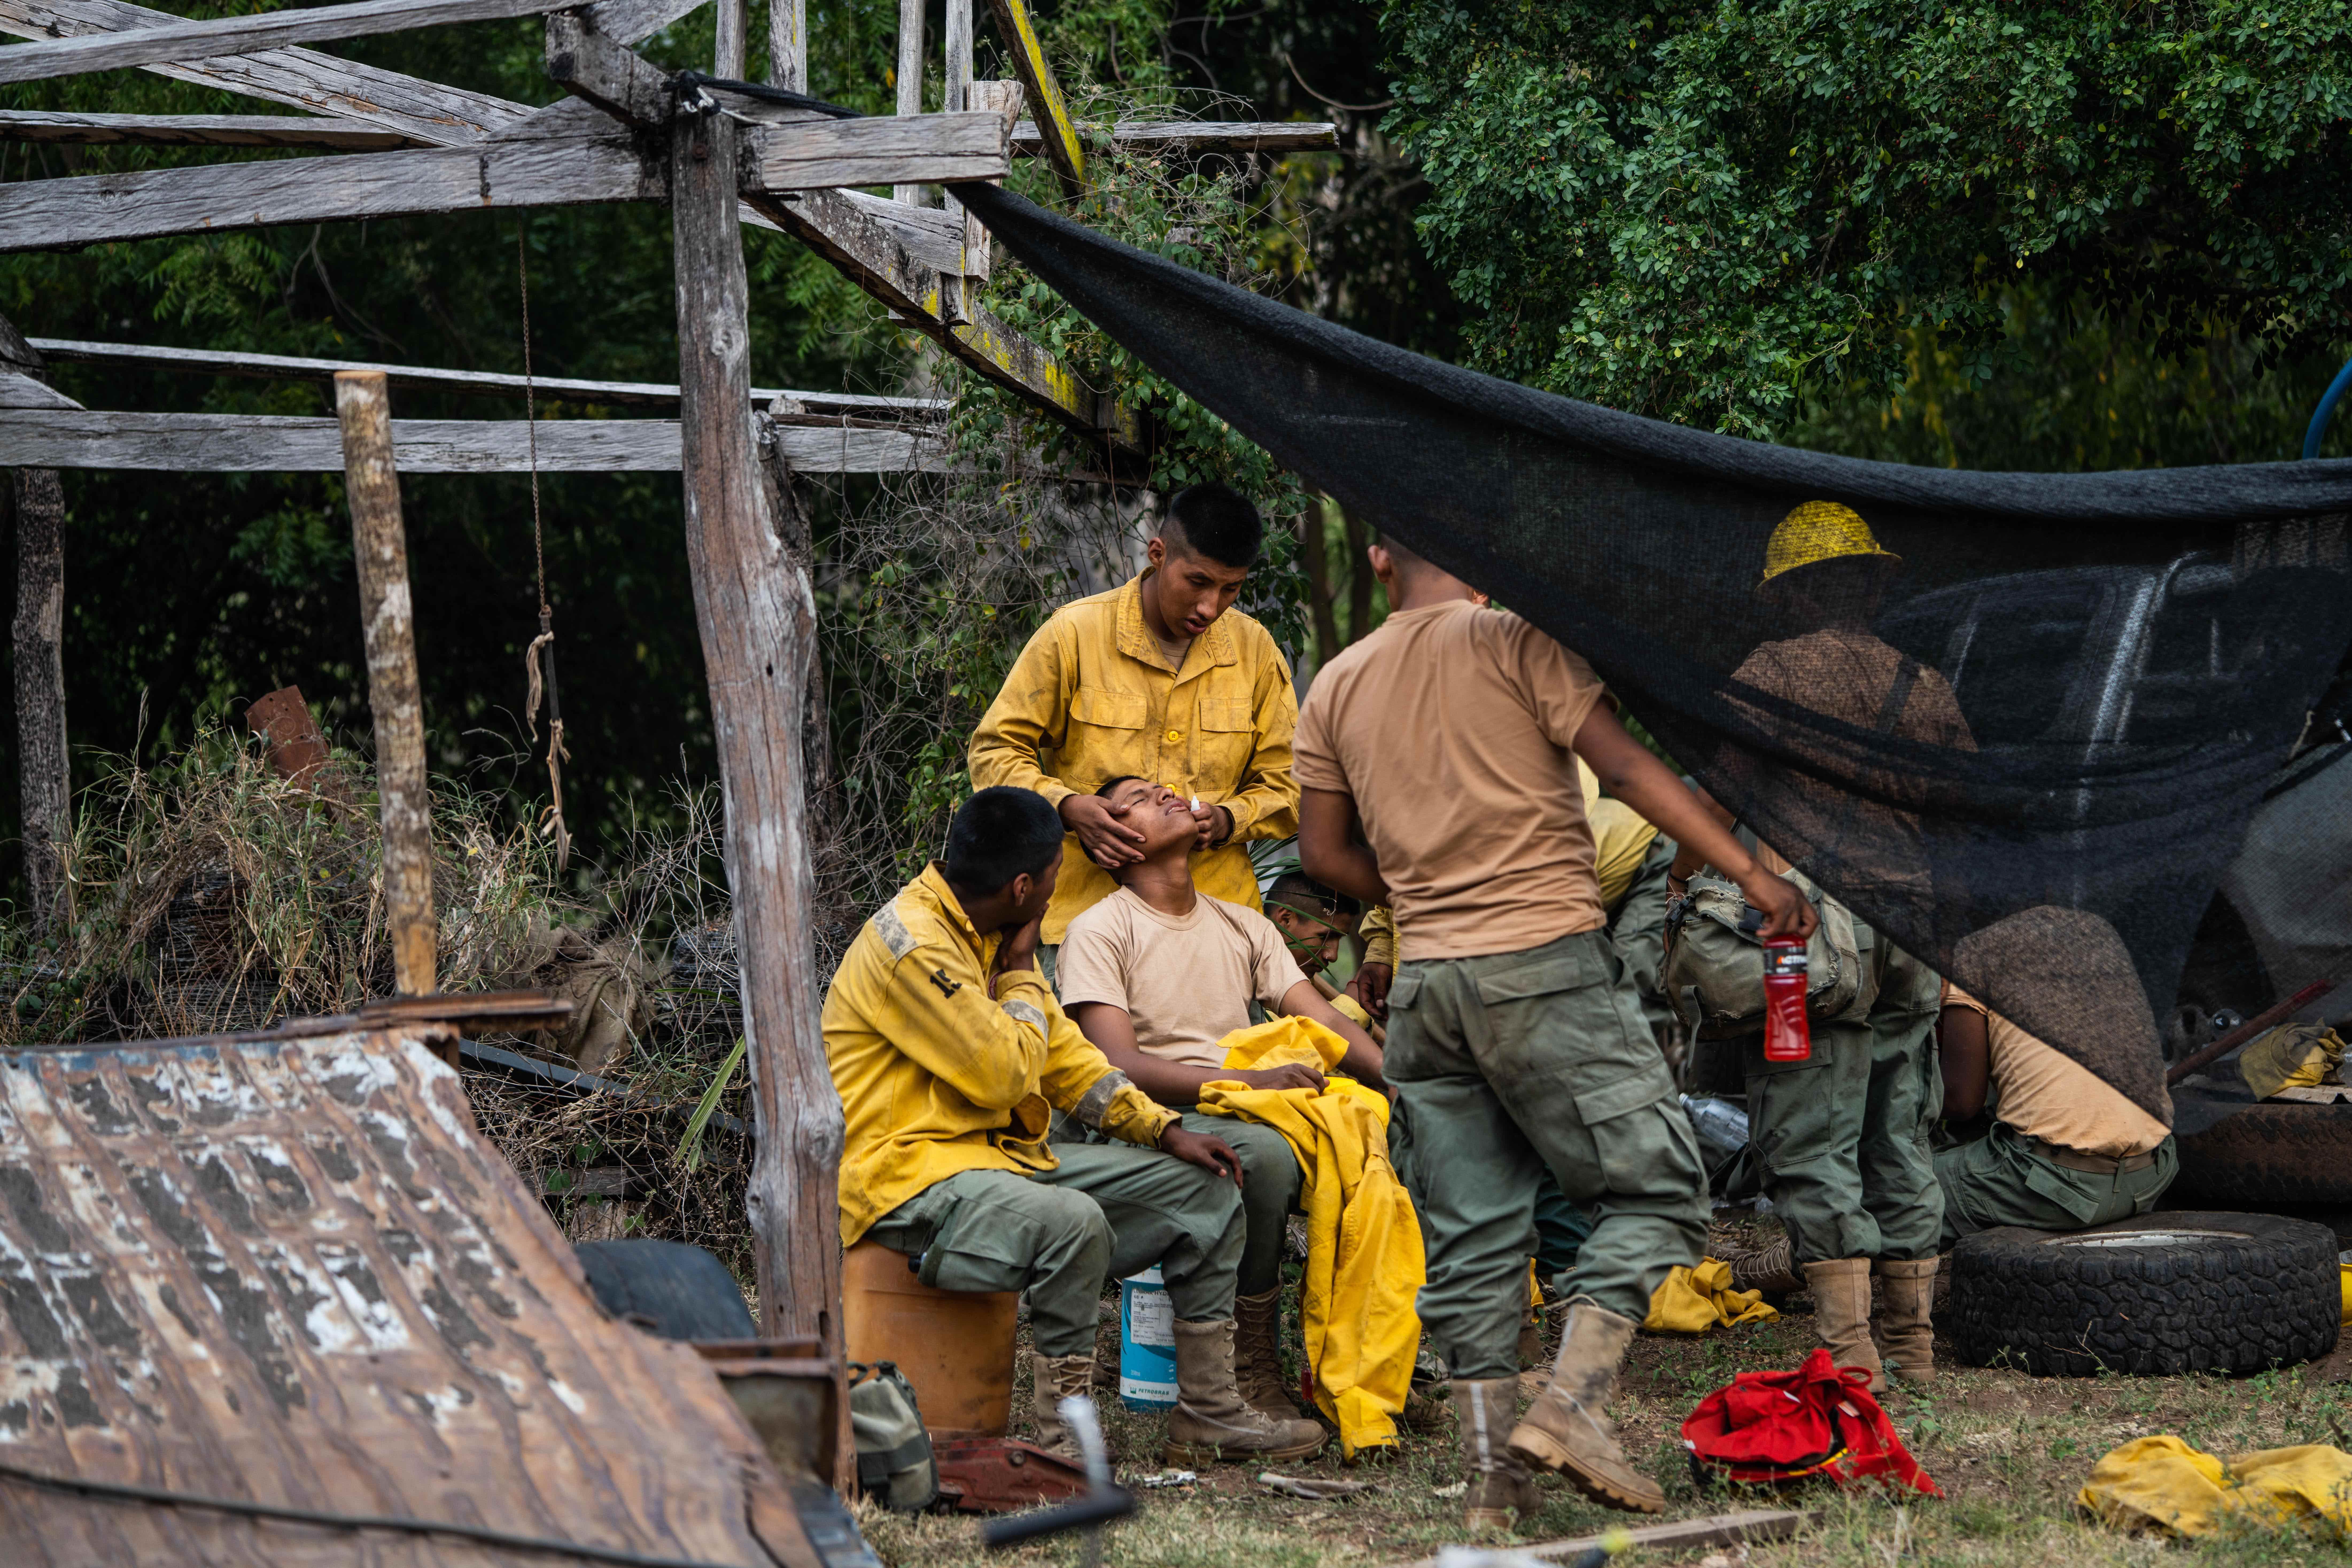 Firefighters rest and receive medical attention after hours of tackling forest fires in the municipality of Roboré. Image by Claudia Belaunde.